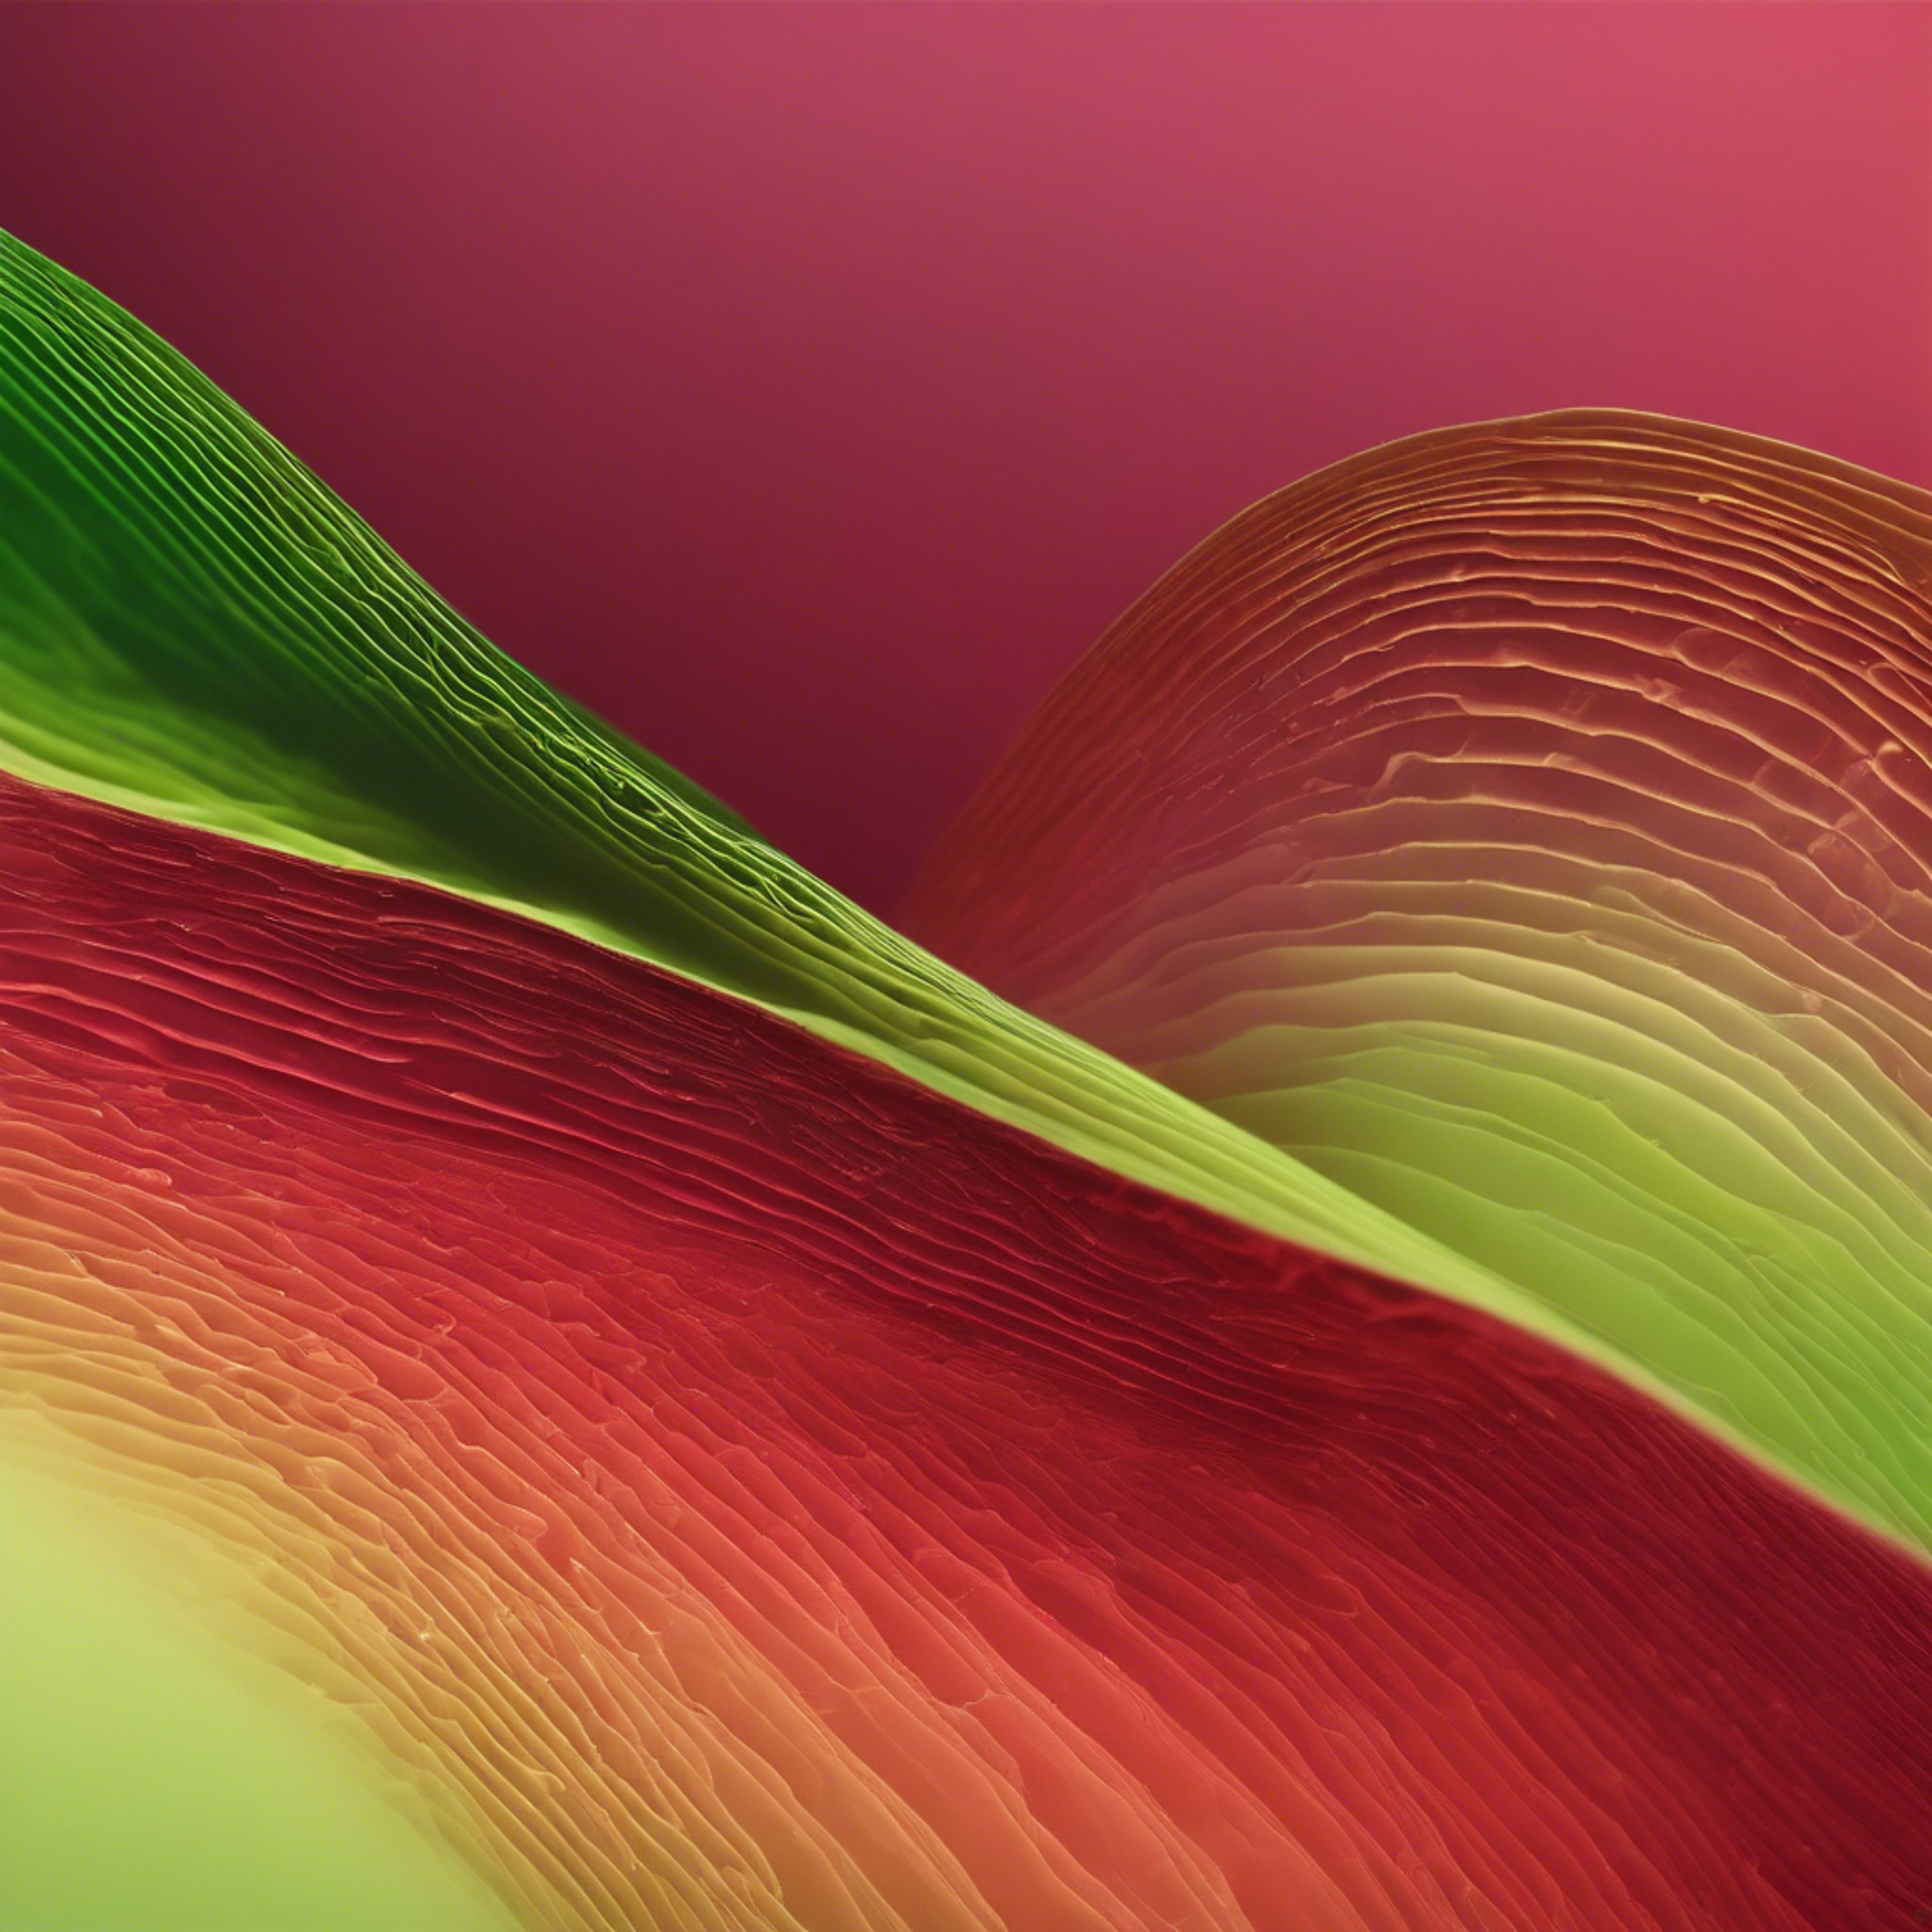 Design portraying a gradient flow from ruby red to lime green Wallpaper[3ca7b80b590c439f91ba]